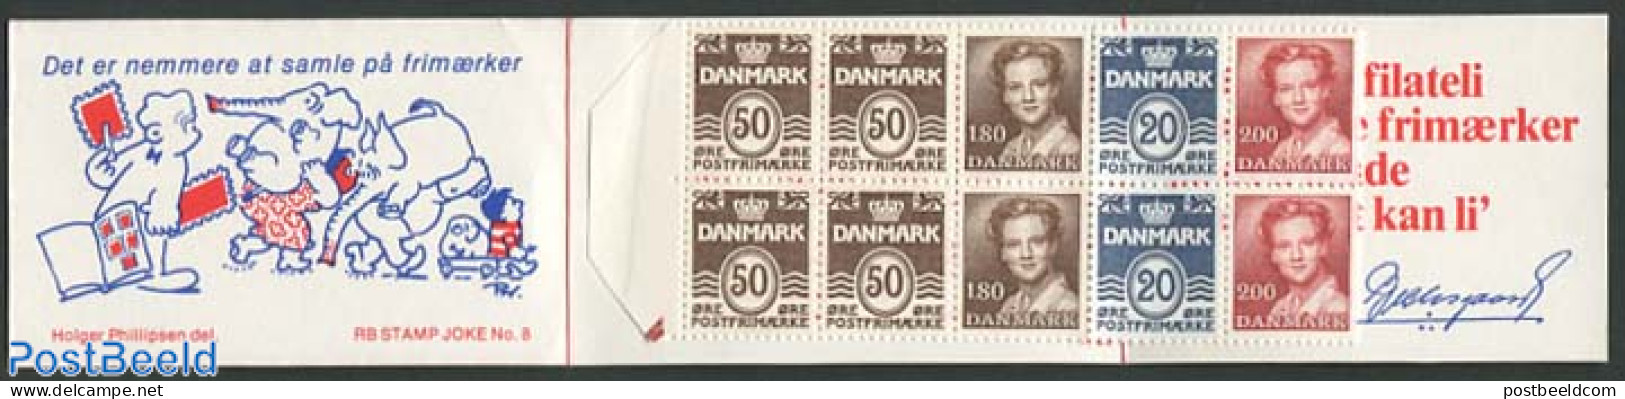 Denmark 1982 Definitives Booklet (H23 On Cover), Mint NH, Stamp Booklets - Neufs